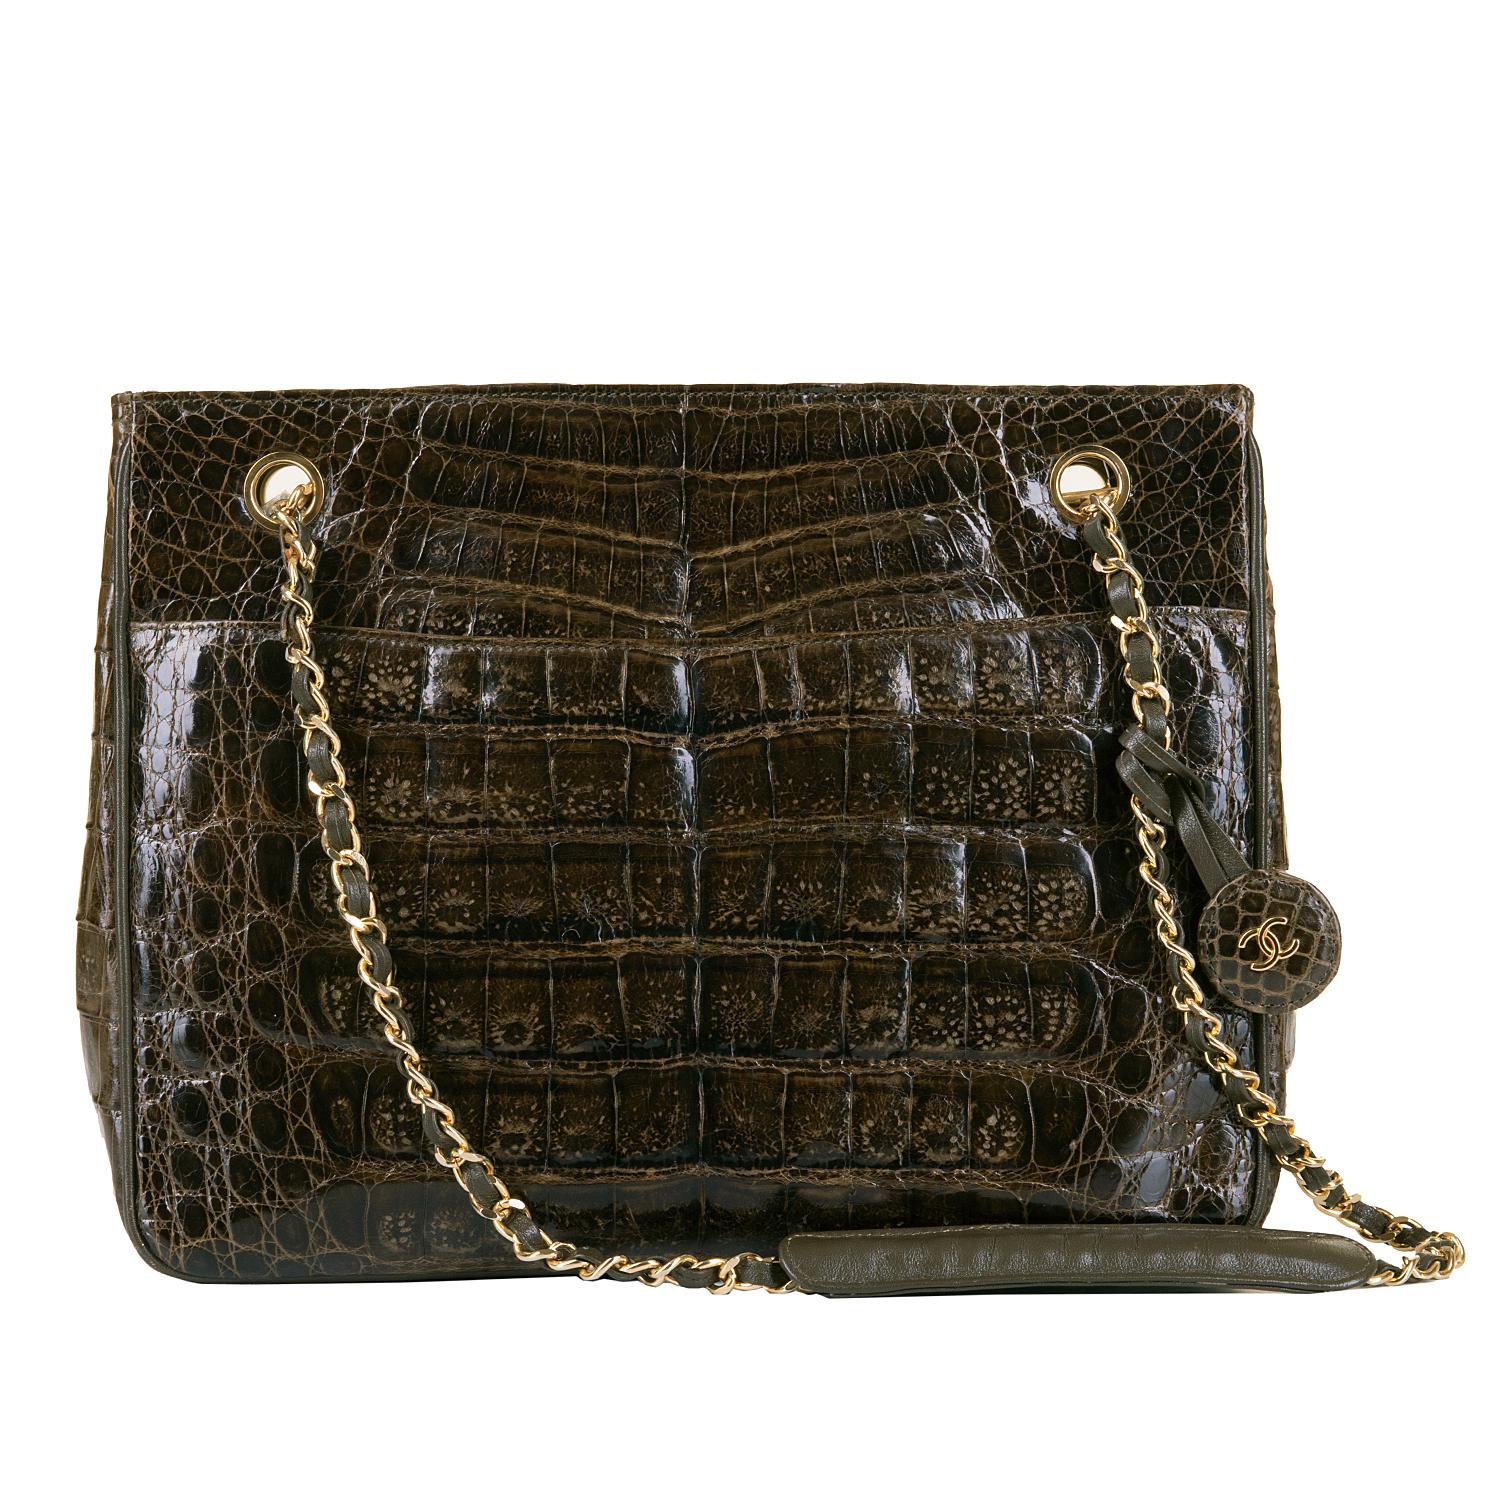 This exquisite vintage Chanel 28cm alligator shoulder bag, designed by Karl Lagerfeld, is from Chanel's 'Pret a Porter' Collection of 1985. With gold hardware, and a featured double 'C' logo tag, the bag is accented with matching brown lambskin